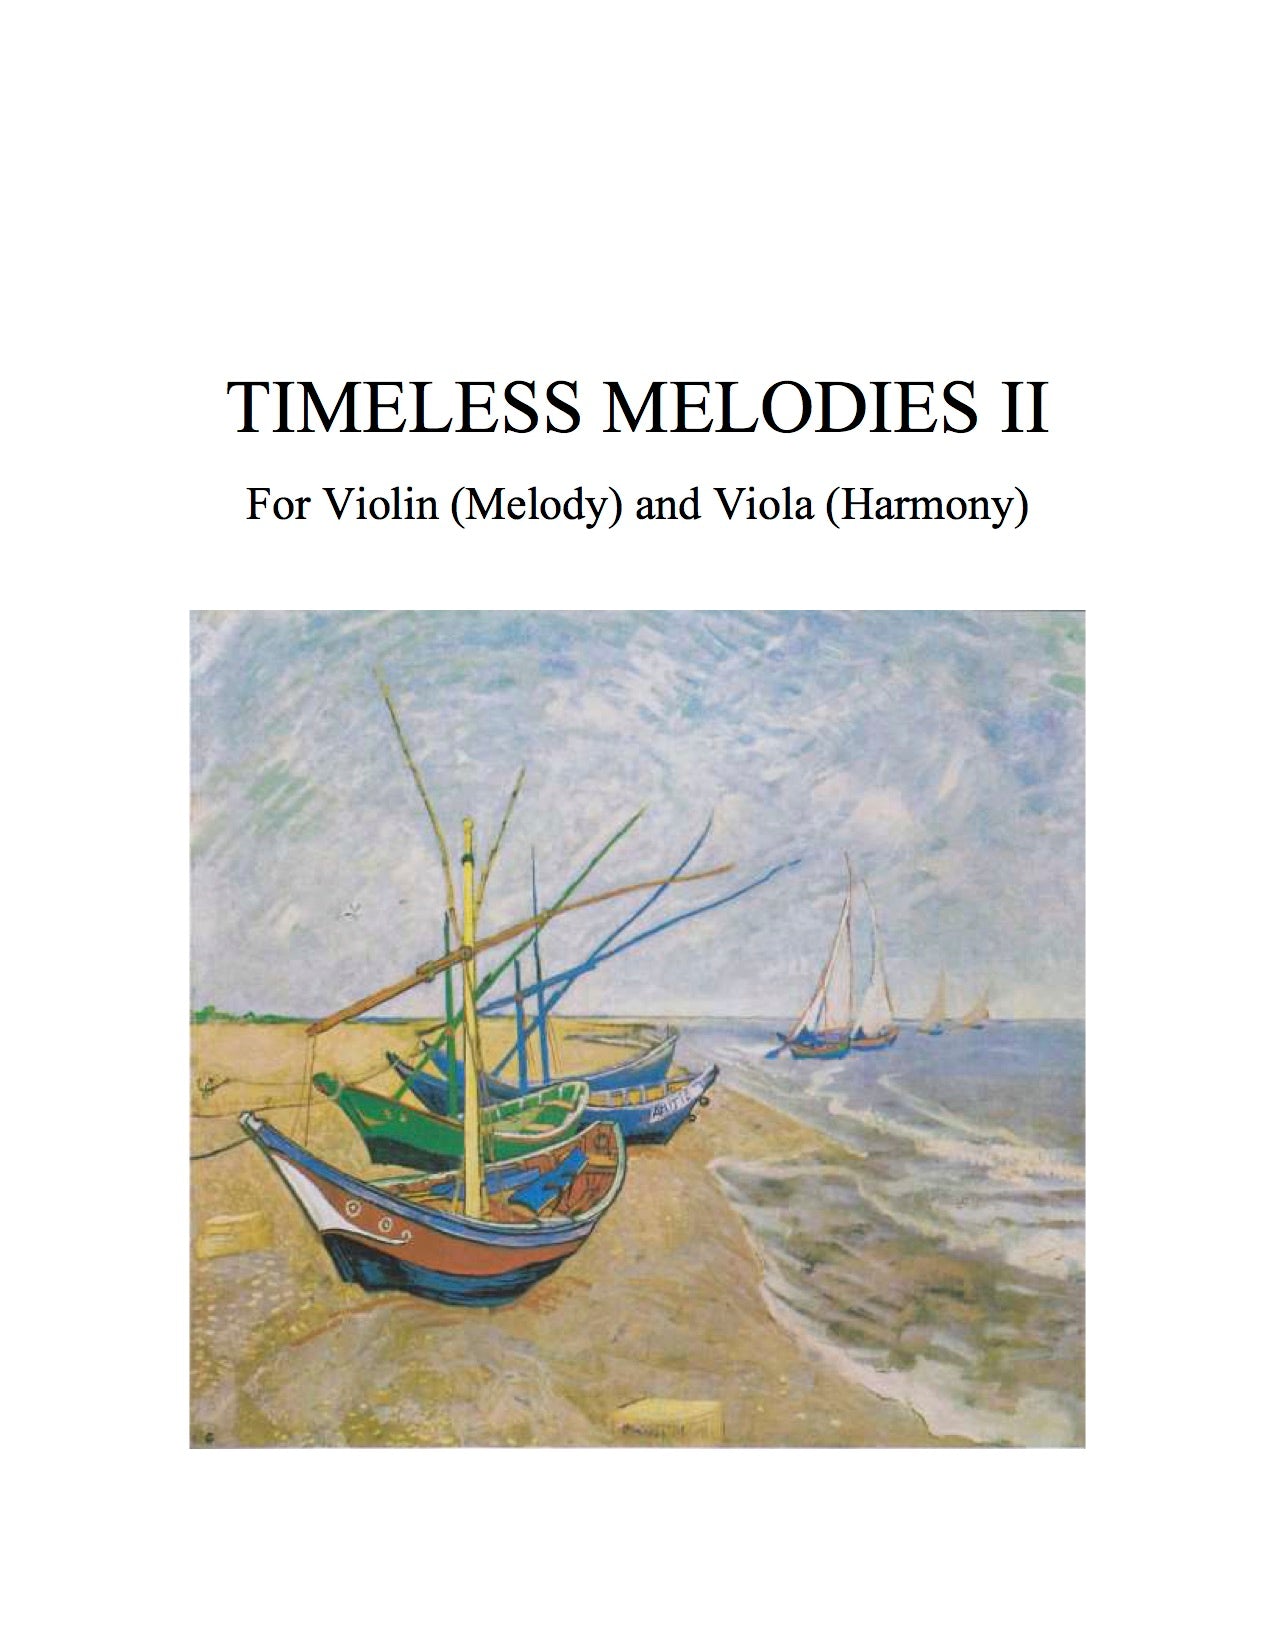 100 - Timeless Melodies II for Violin (Melody) and Viola (Harmony) [Solos for Young Violinists, Vol. III-V Favorites]